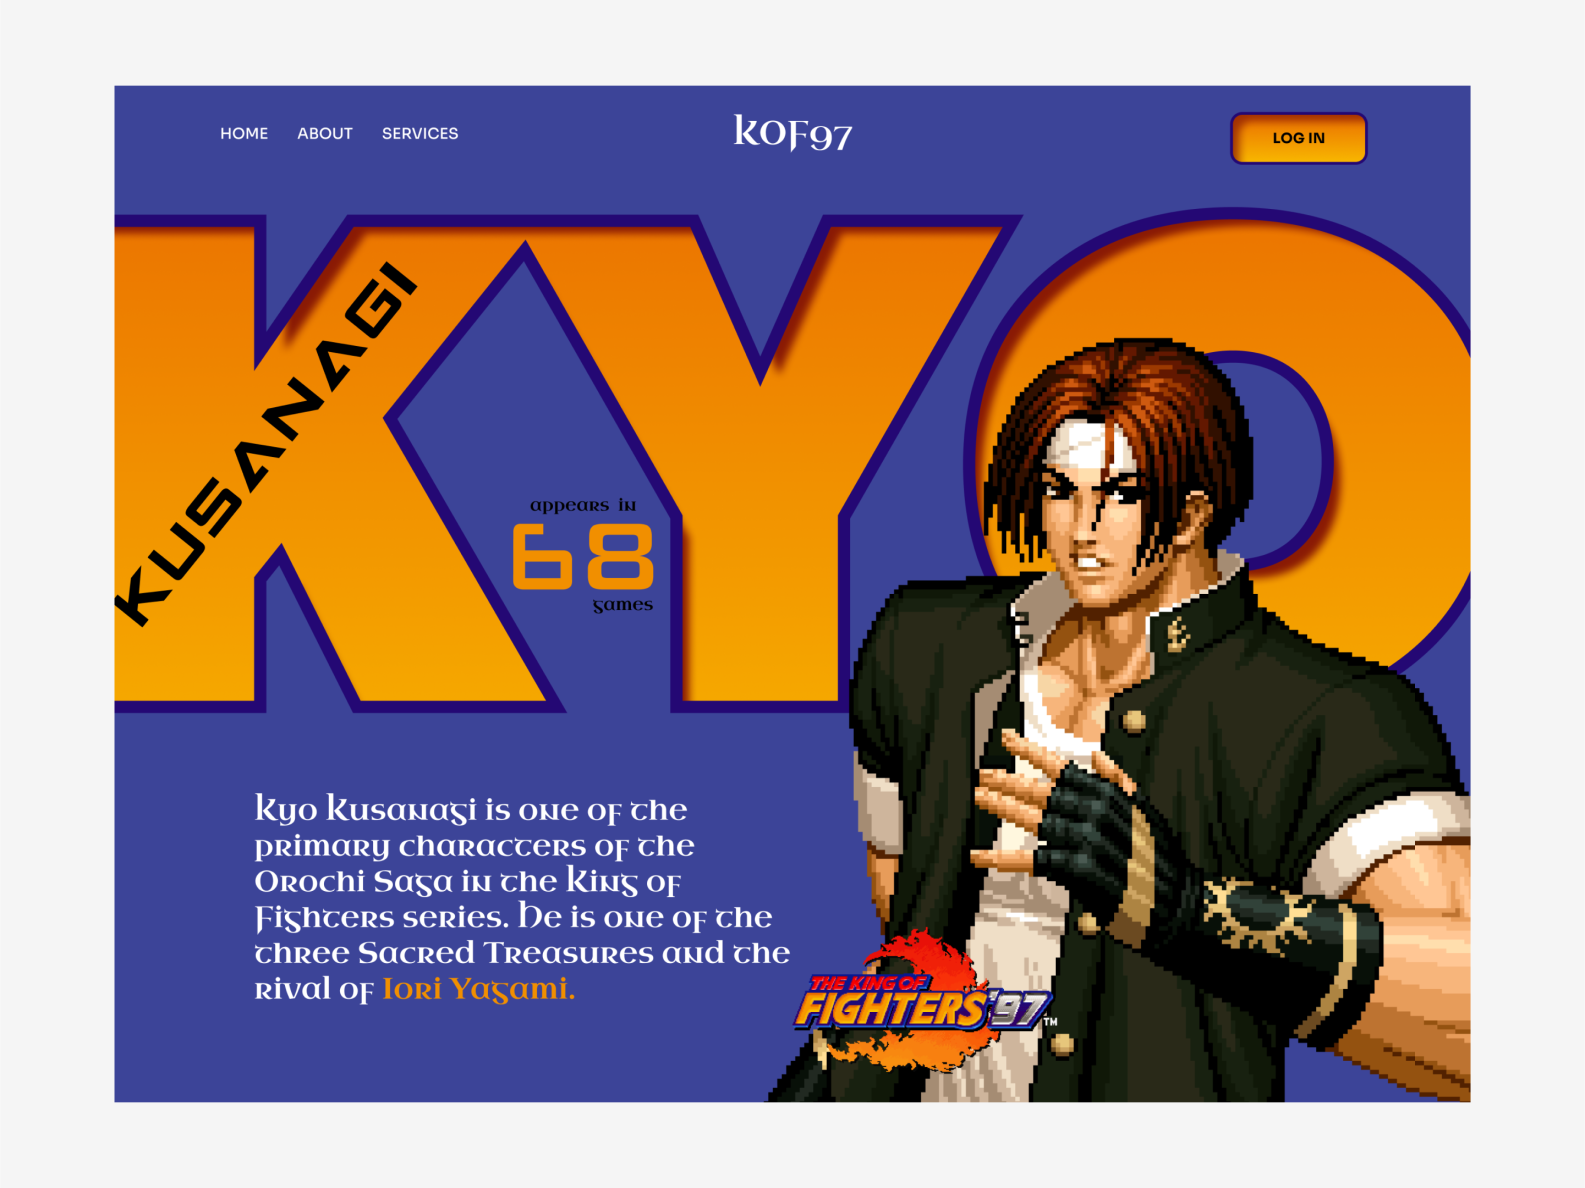 King of fighter 97, kyo kusanagi Website design concept. by Shimul